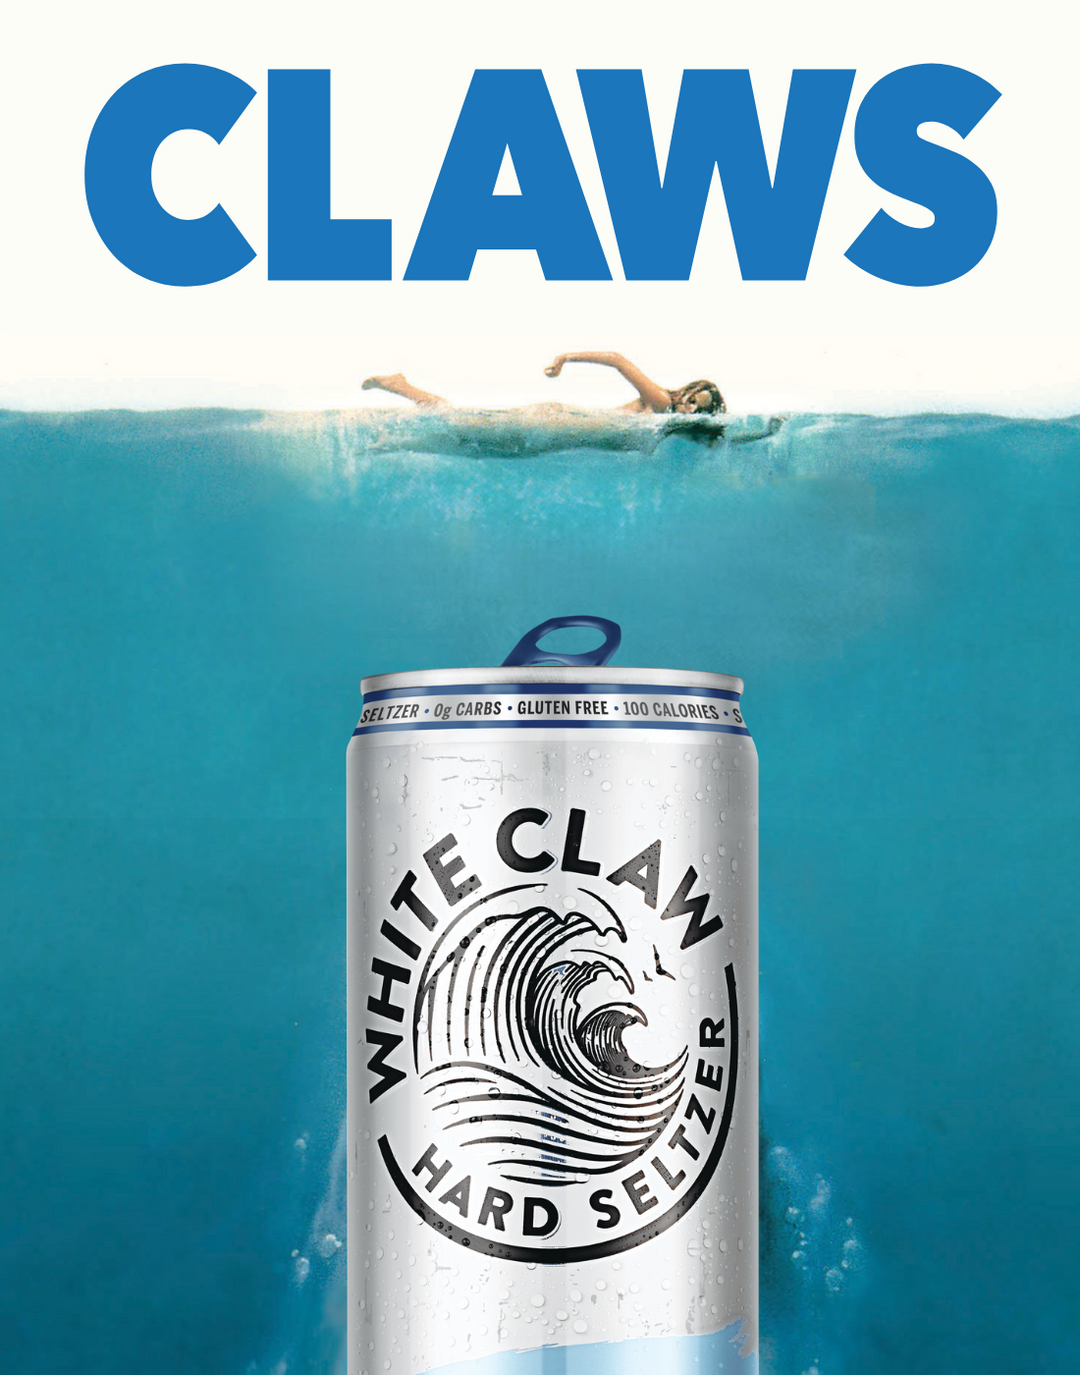 CLAWS POSTER IN MULTIPLE COLORS - PosterFi